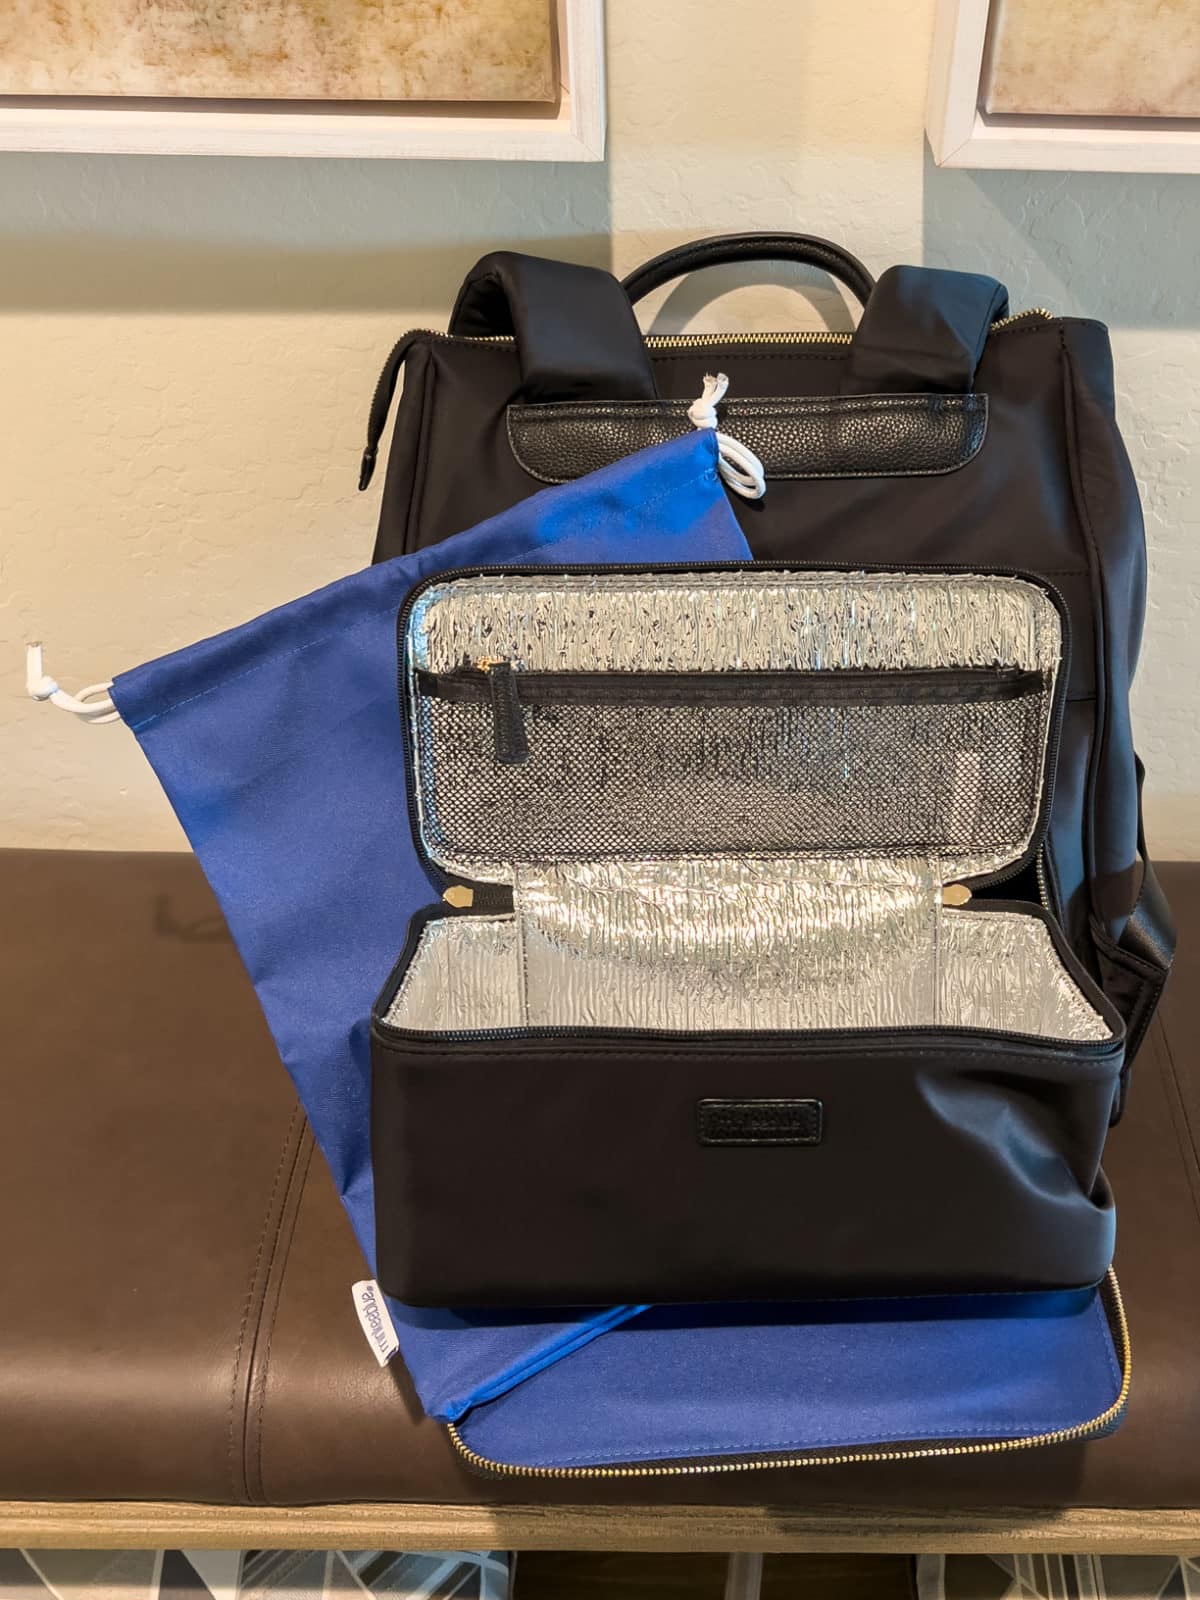 Minkeeblue Amber Backpack has a lunch/cosmetic bag and a heavy-duty shoe bag.